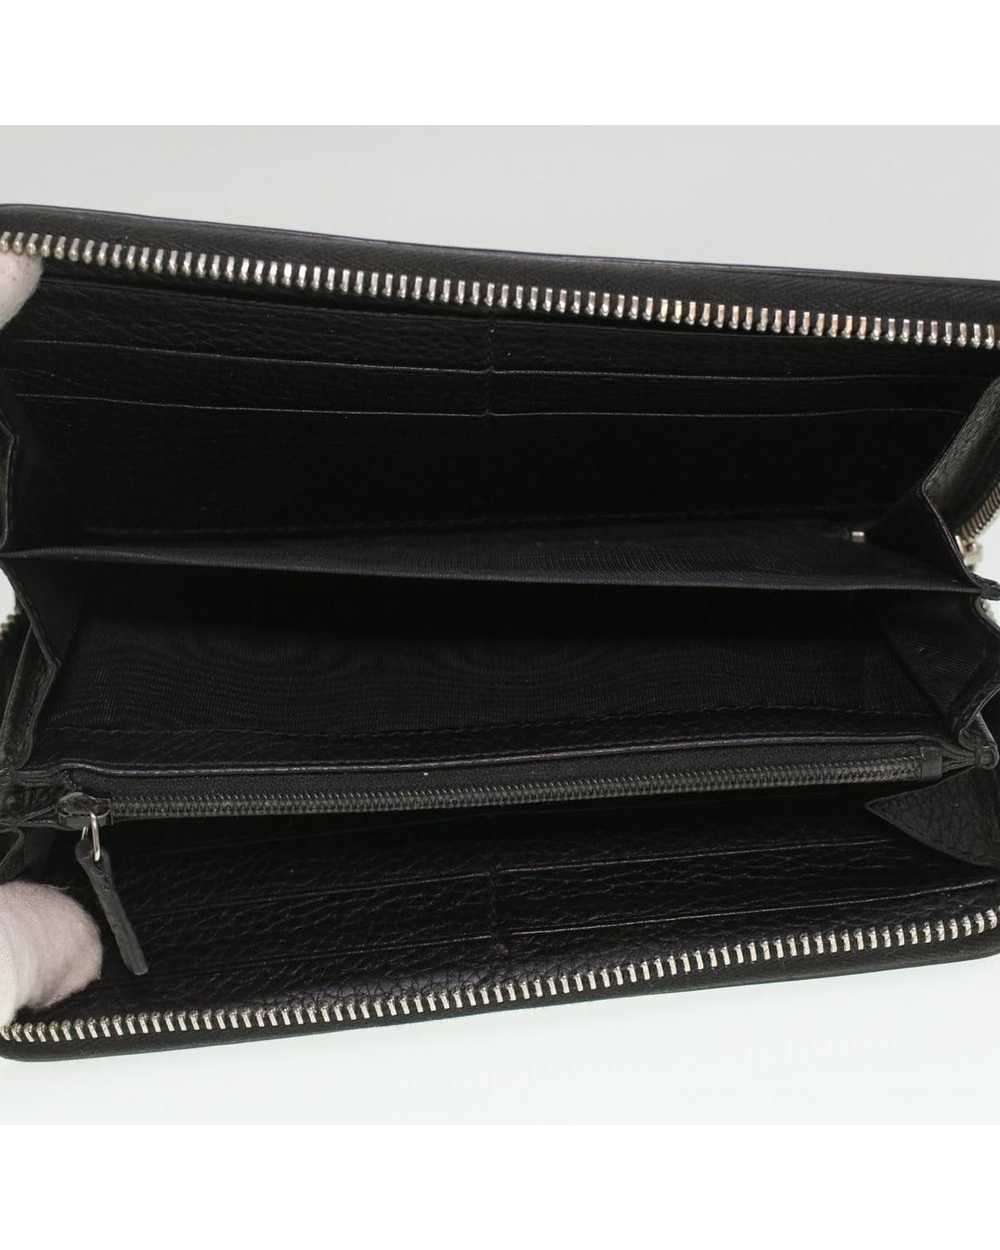 Gucci Black Leather Long Wallet by Gucci 473928 - image 8